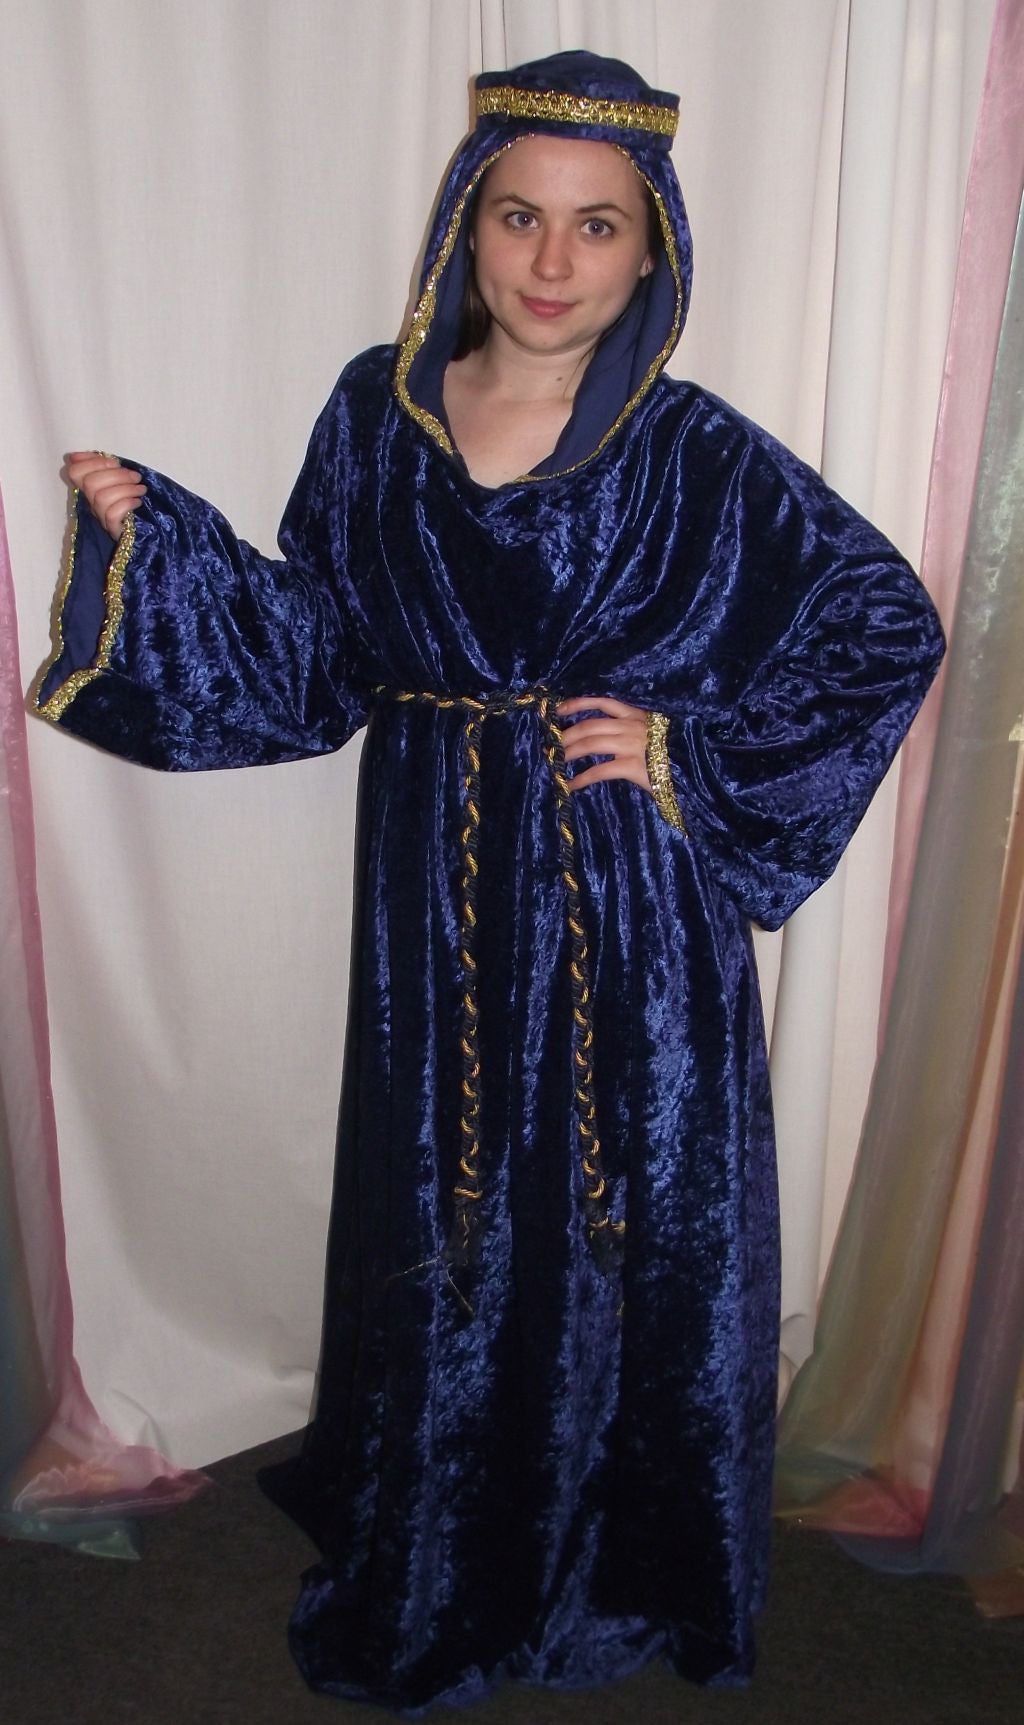 PURPLE MEDIEVAL DRESS WITH HOOD ATTACHED